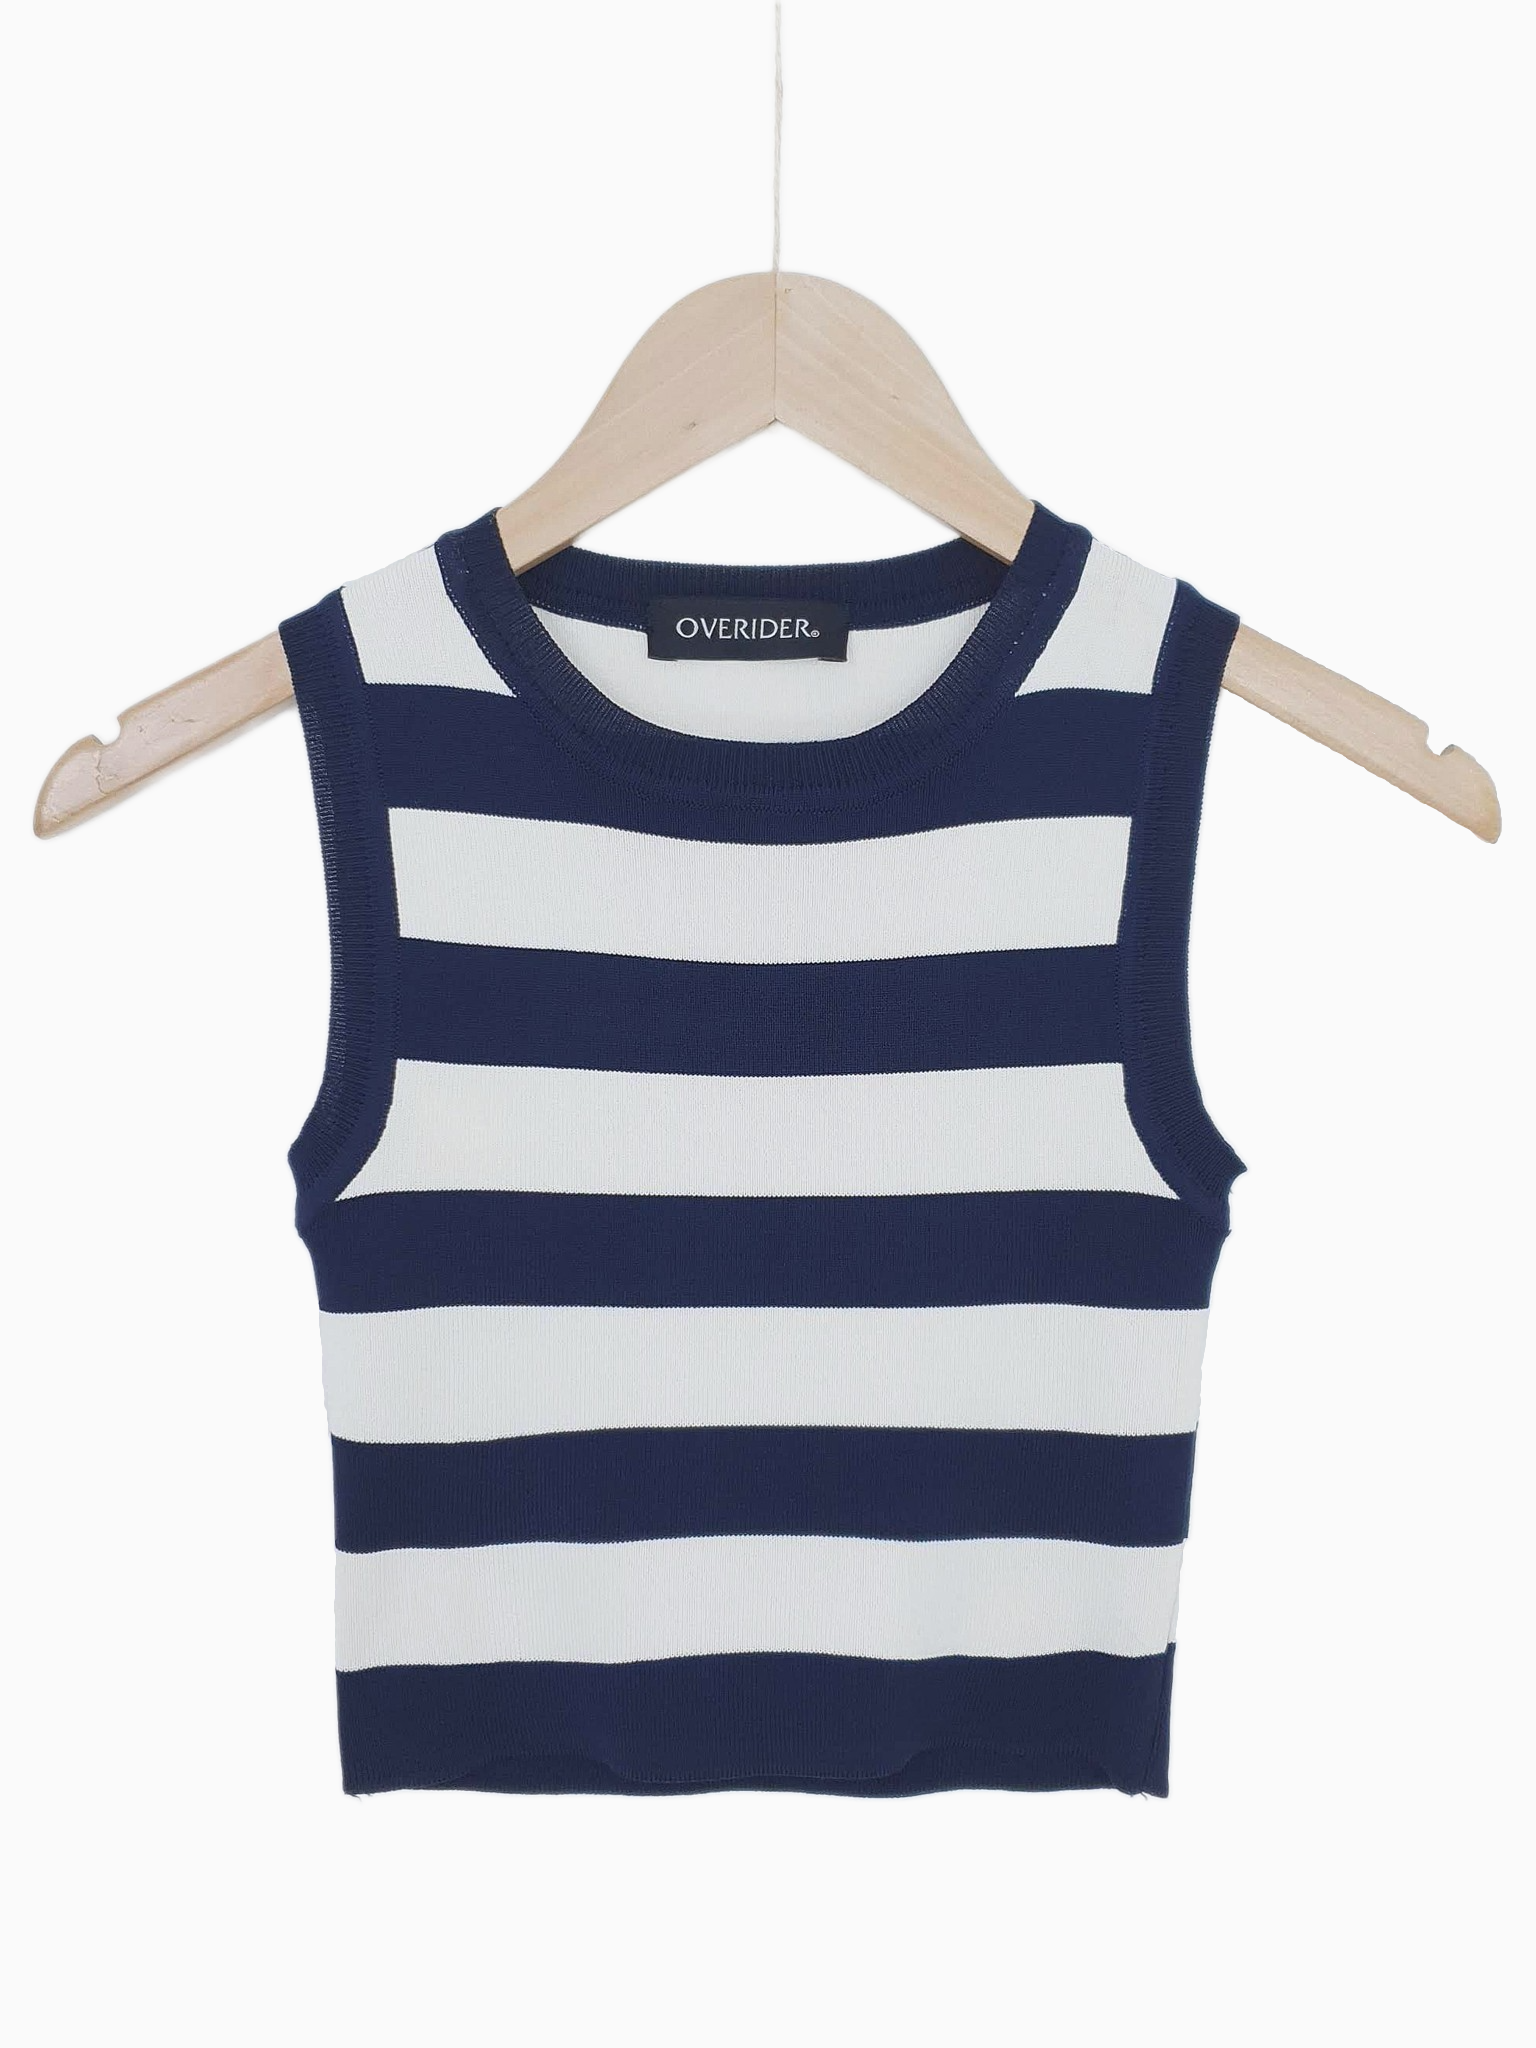 COCO | Striped Cropped Top | Blue or Navy